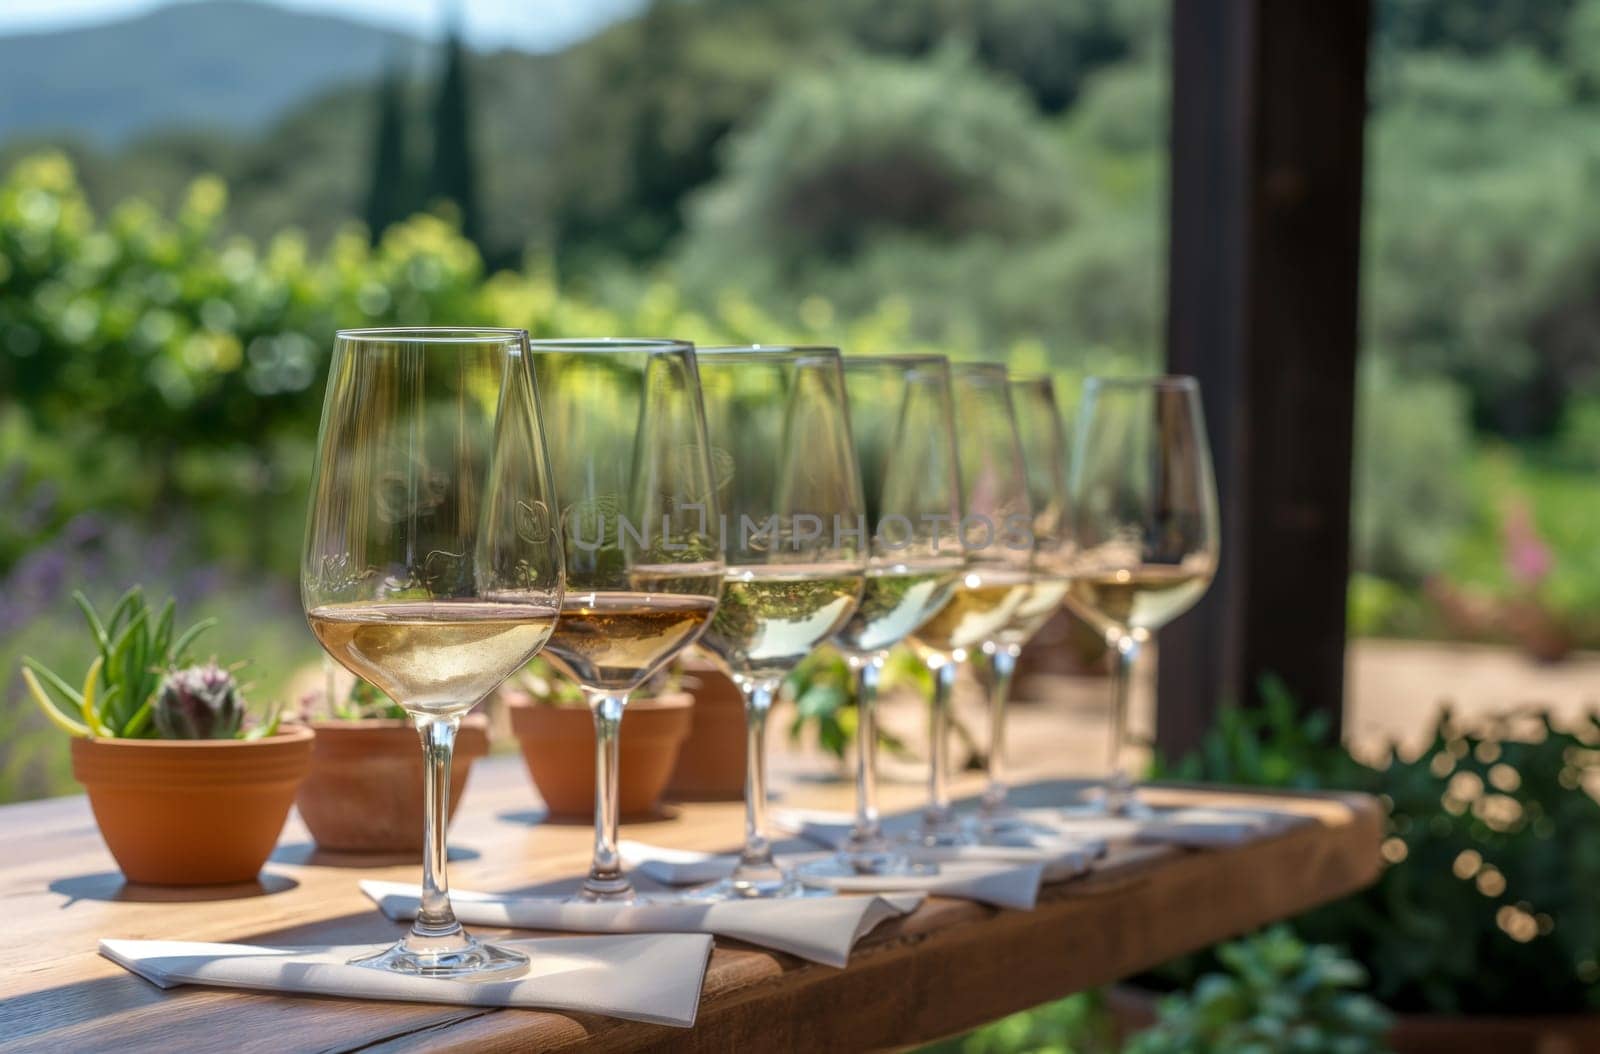 Rows of wine glasses filled with white wine sit on a wooden table outdoors, with a vineyard in the background, reminiscent of a casual wine tasting